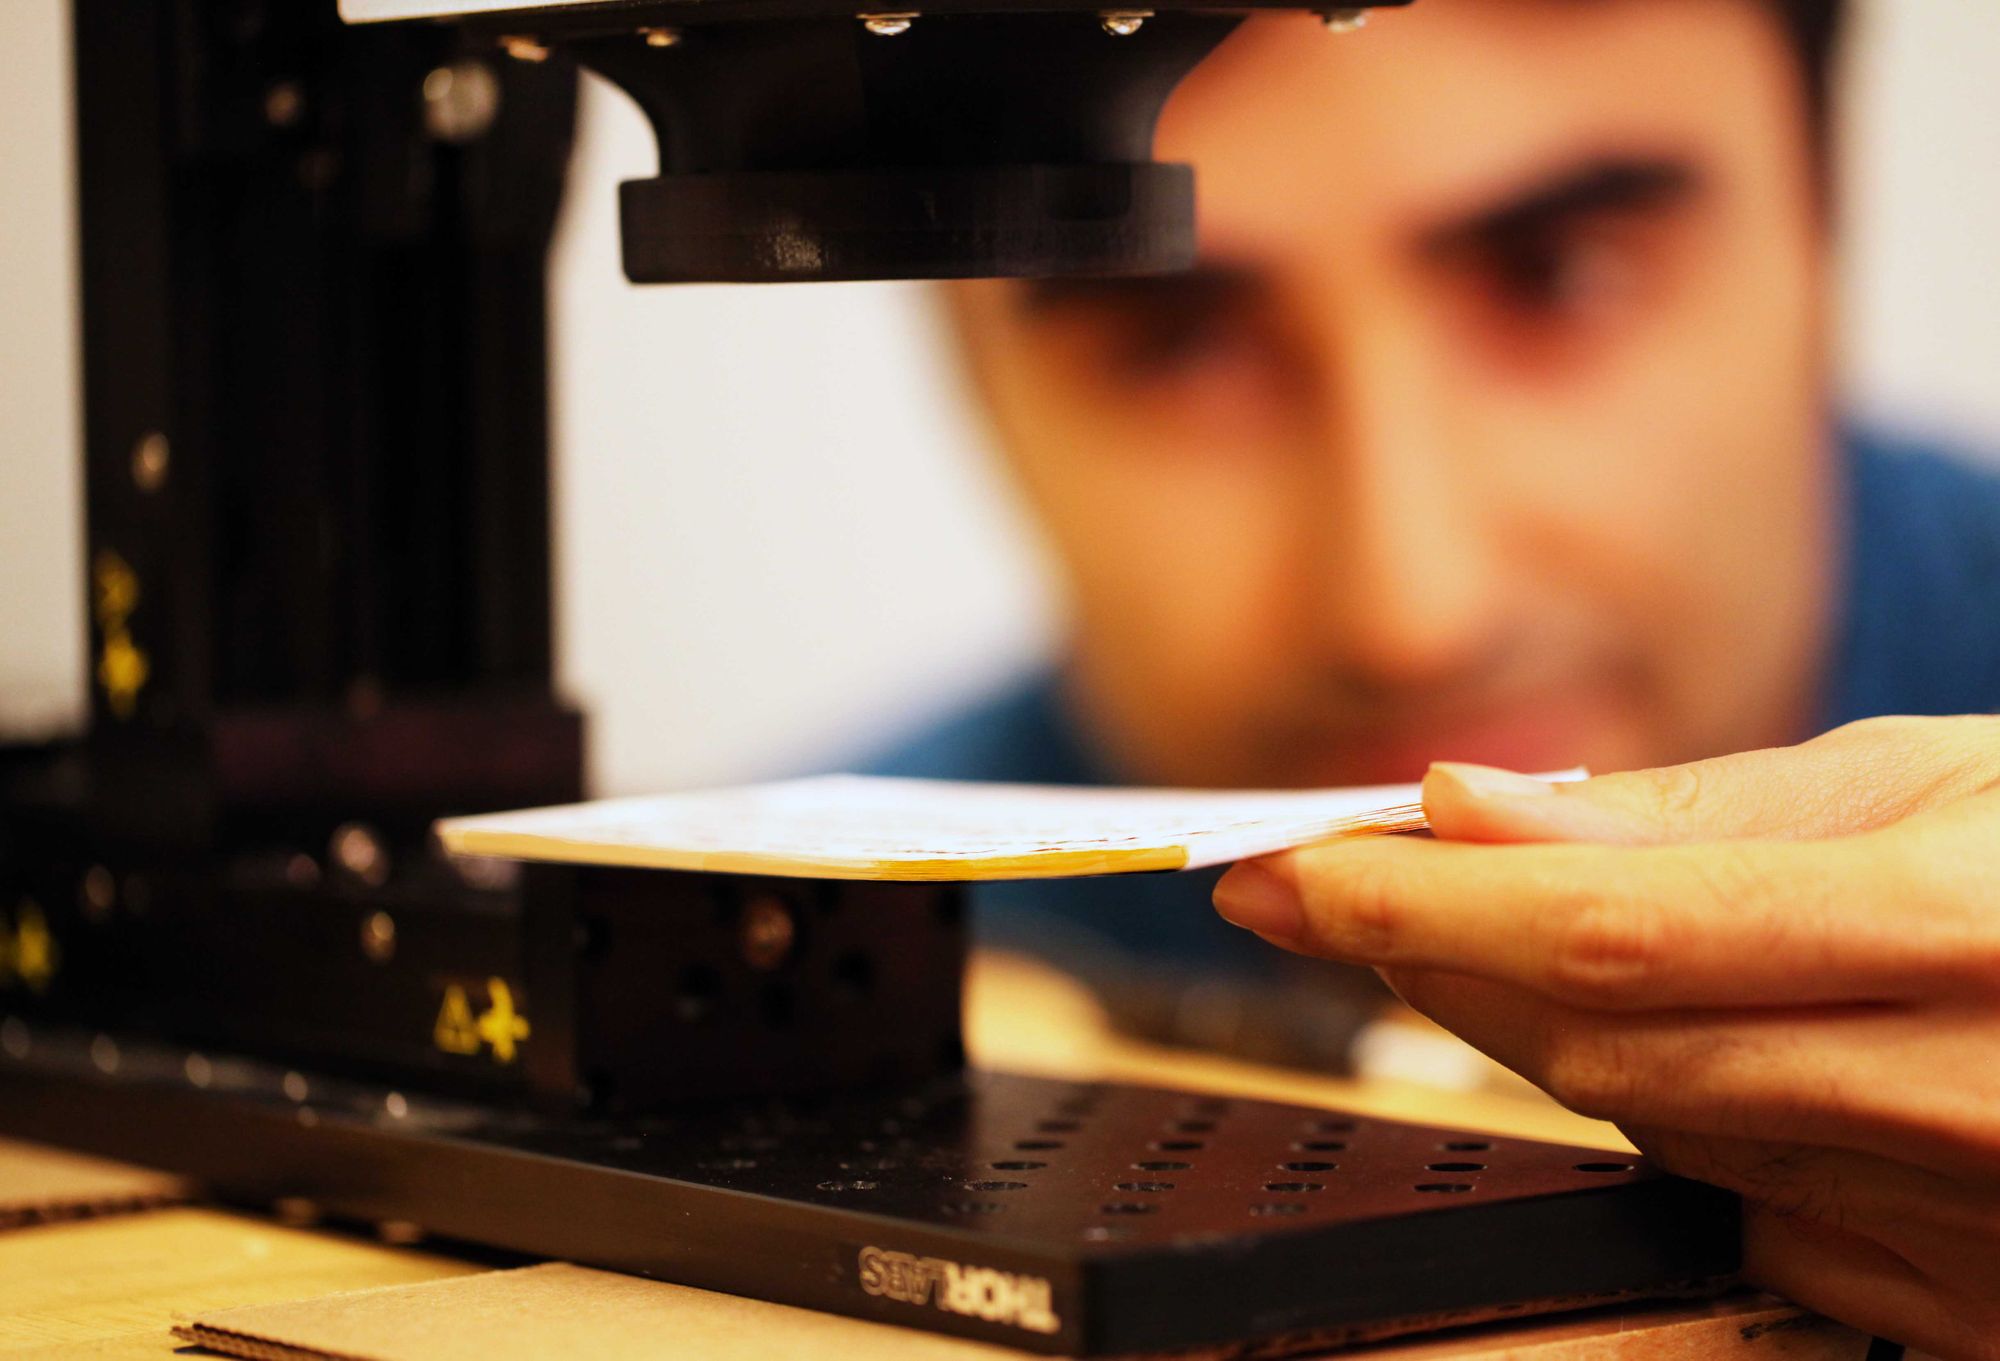 MIT scientists invented a camera that can read books without opening them